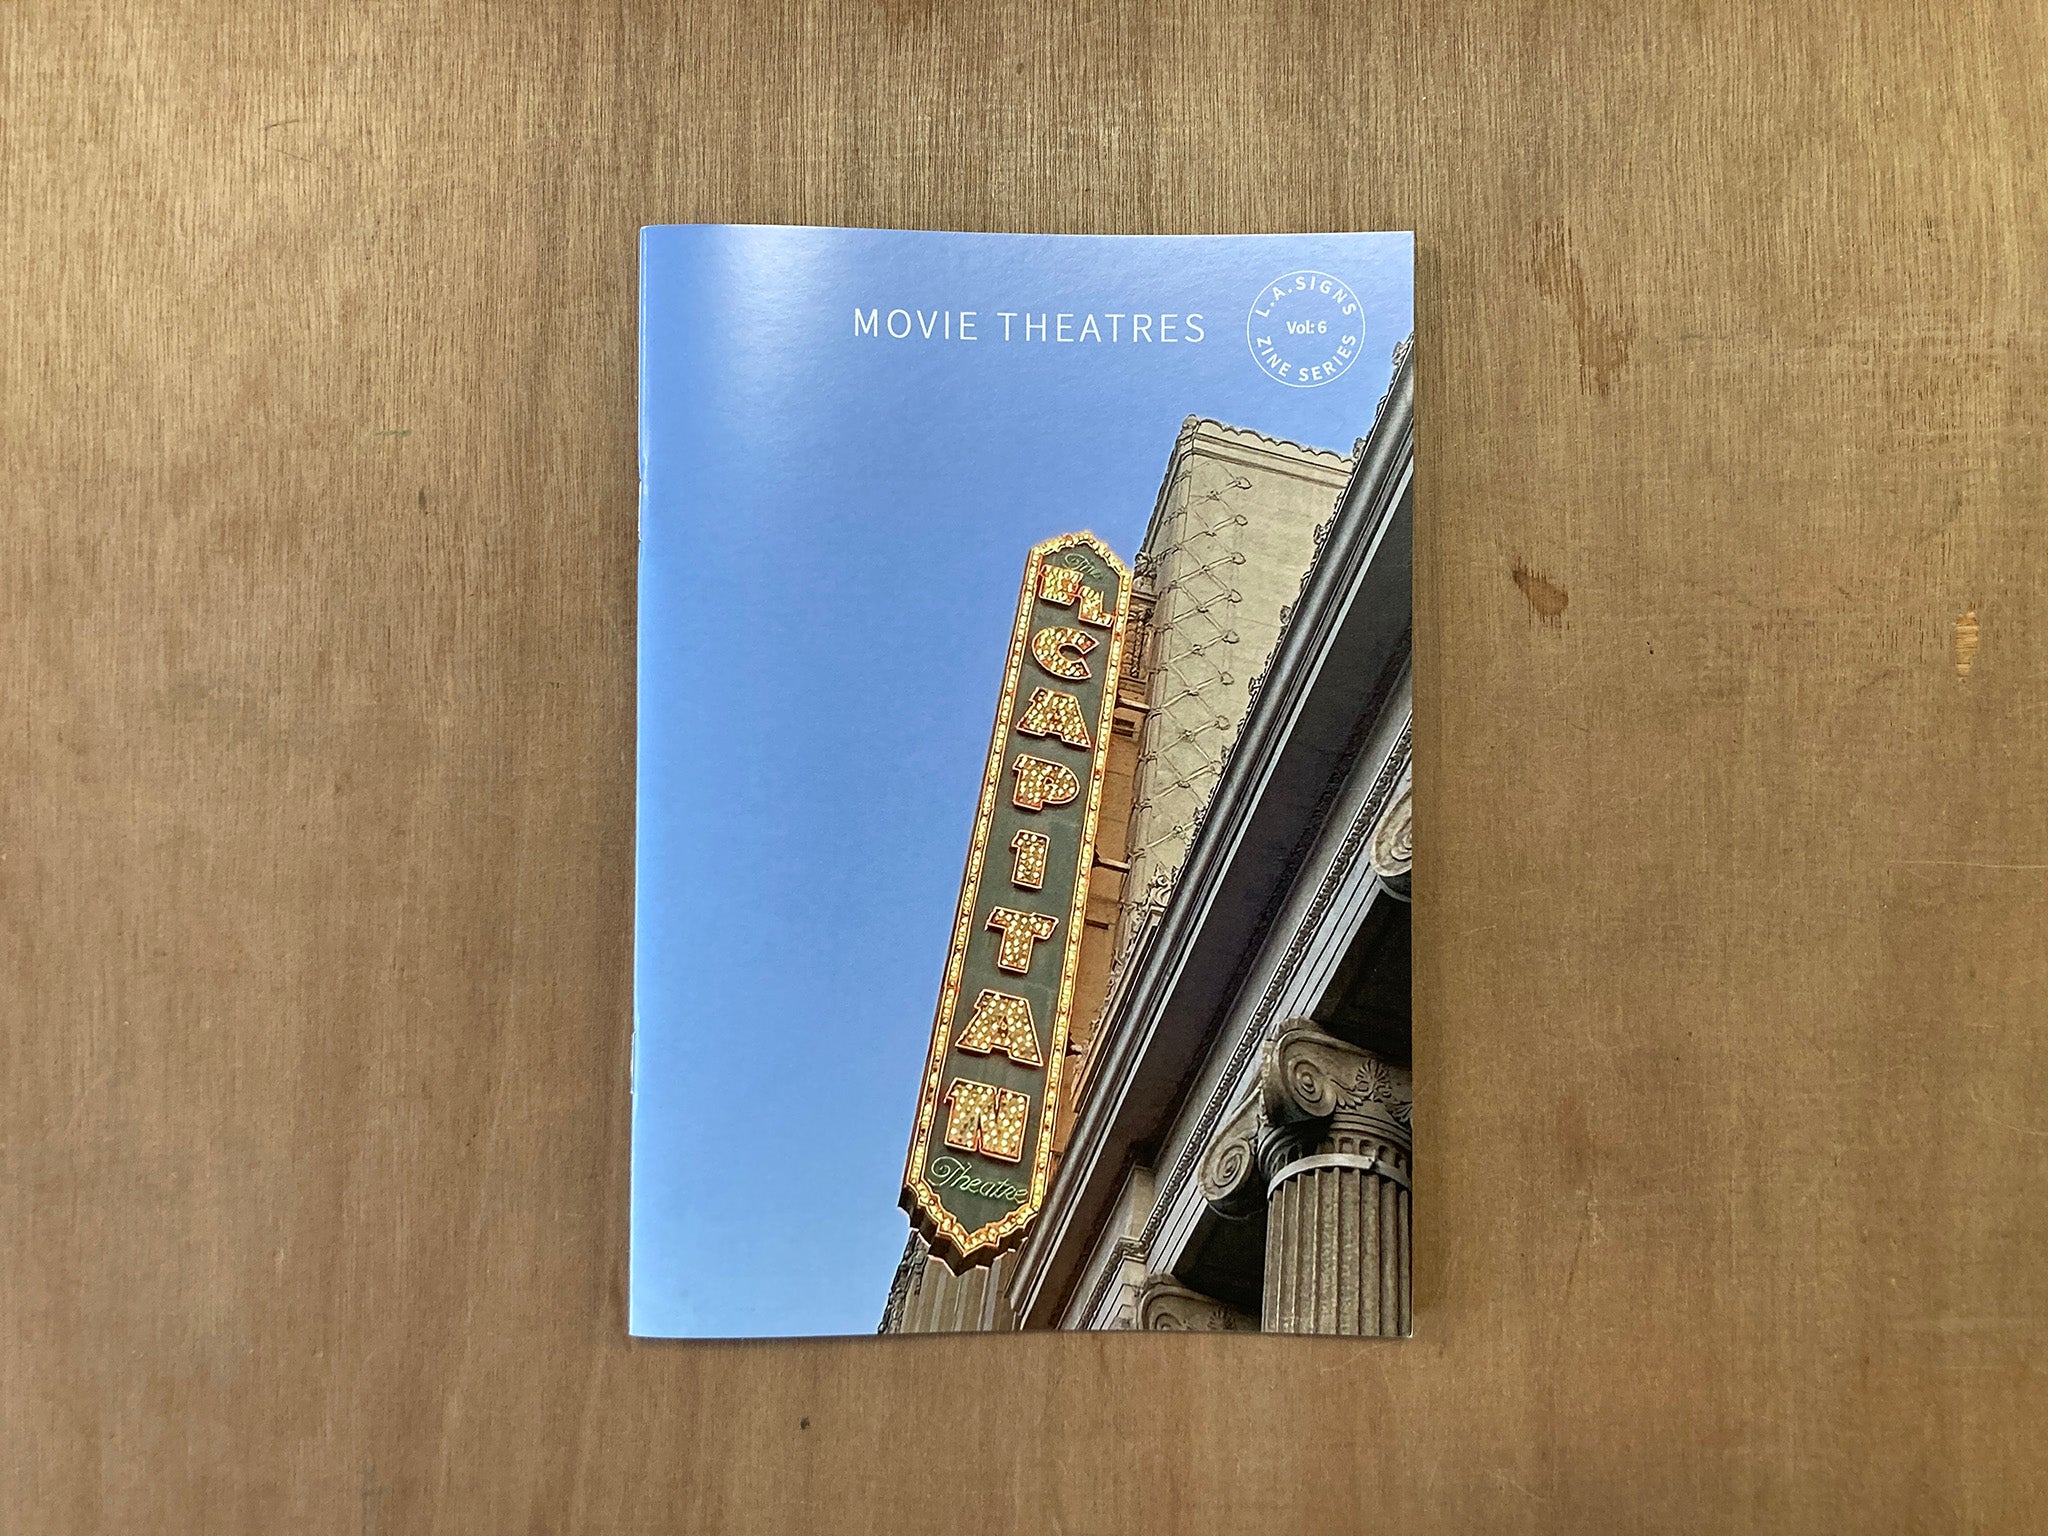 L.A. SIGNS ZINE SERIES: MOVIE THEATRES by Paul Price